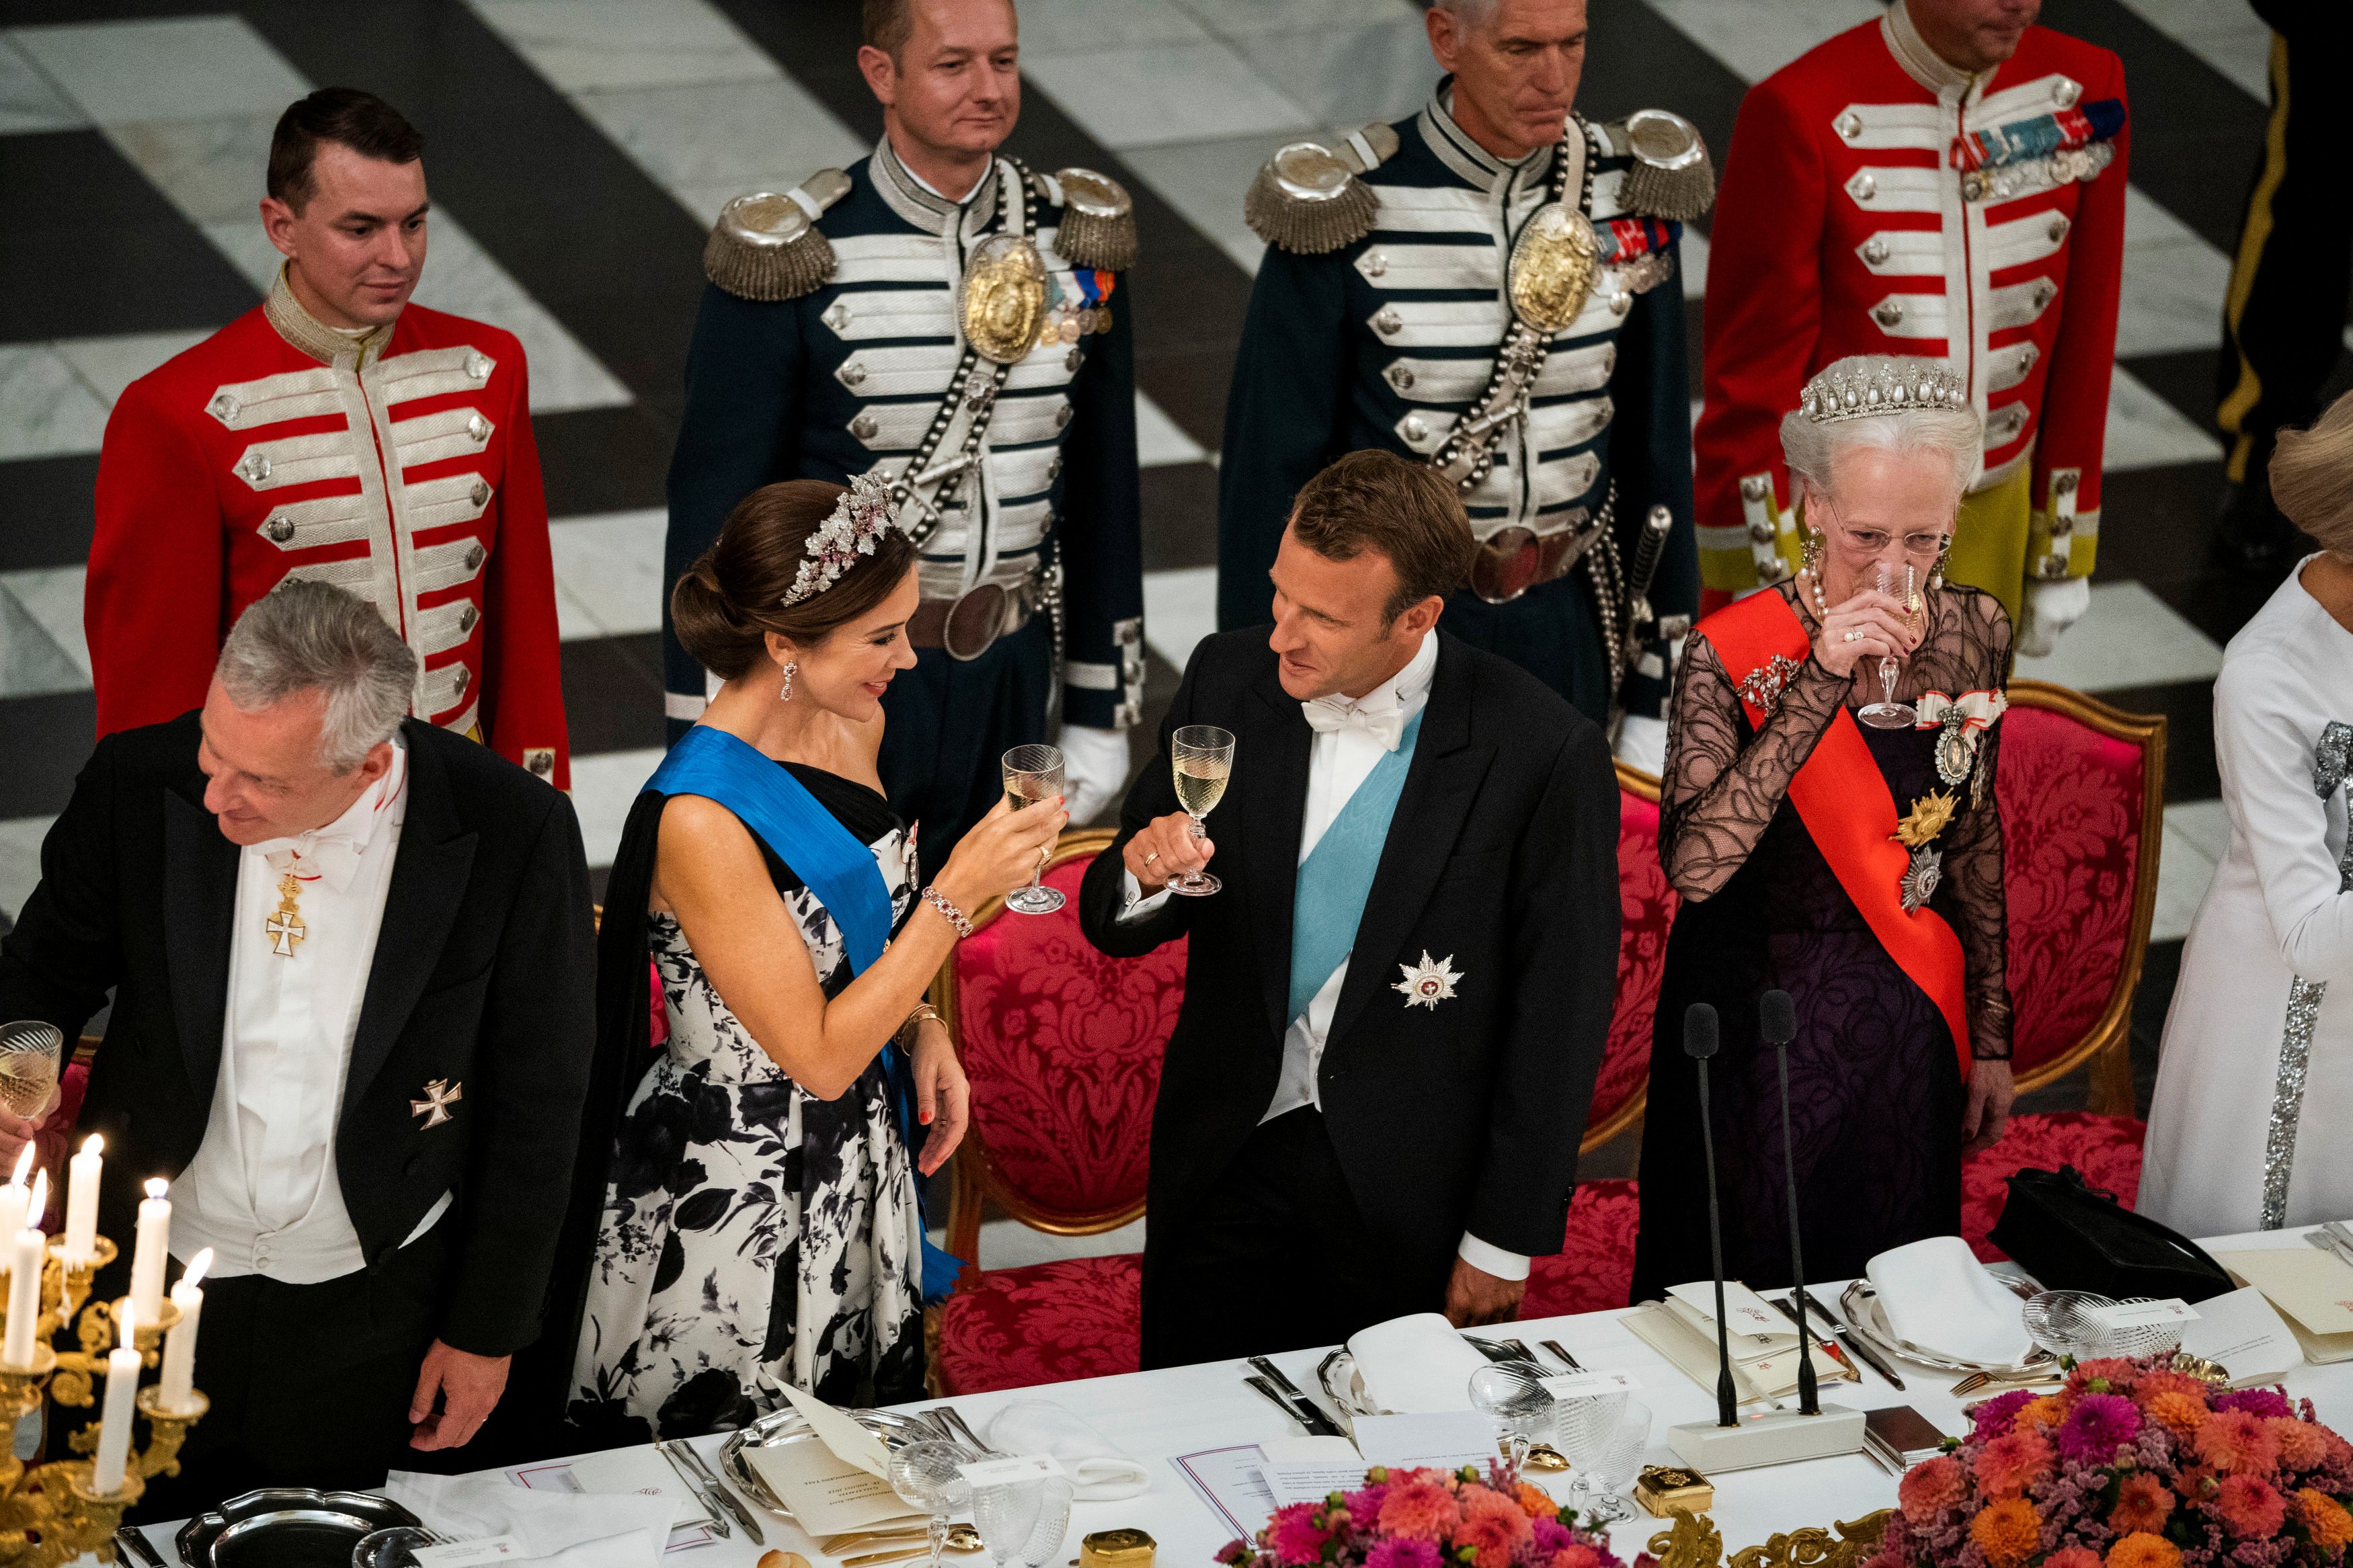 Crown Princess Mary, French President Emmanuel Macron and Queen Margrethe toast during State Banquet at Christiansborg Castle in Copenhagen, Denmark, August 28, 2018. Martin Sylvest/Ritzau Scanpix/via REUTERS ATTENTION EDITORS - THIS IMAGE WAS PROVIDED BY A THIRD PARTY. DENMARK OUT. - RC1C06DBF170